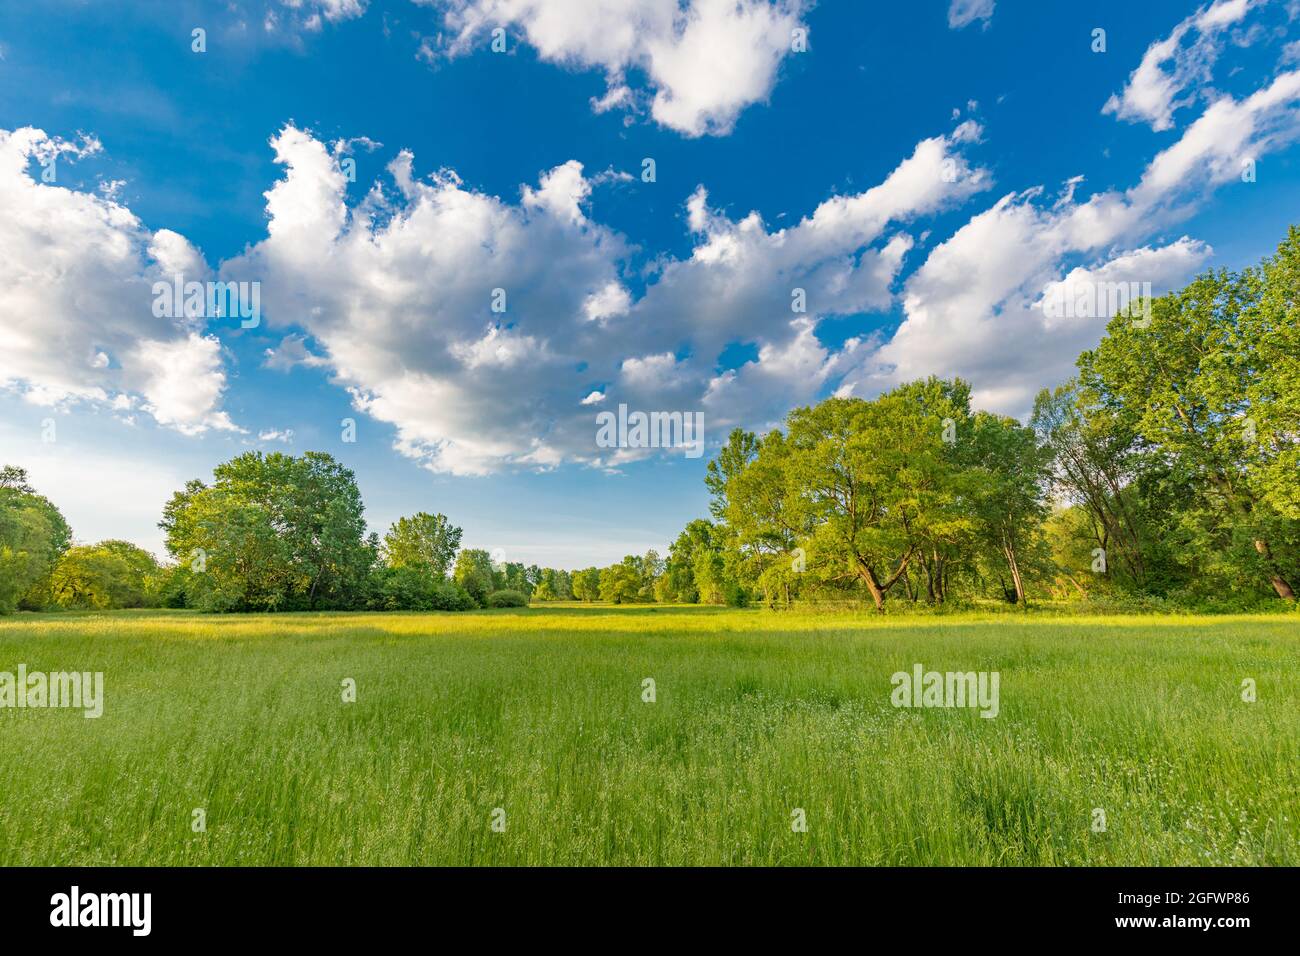 Sunny spring summer landscape, green forest trees, meadow flowers field panoramic vibrant rural nature with cloudy blue sky. Idyllic nature scenic Stock Photo